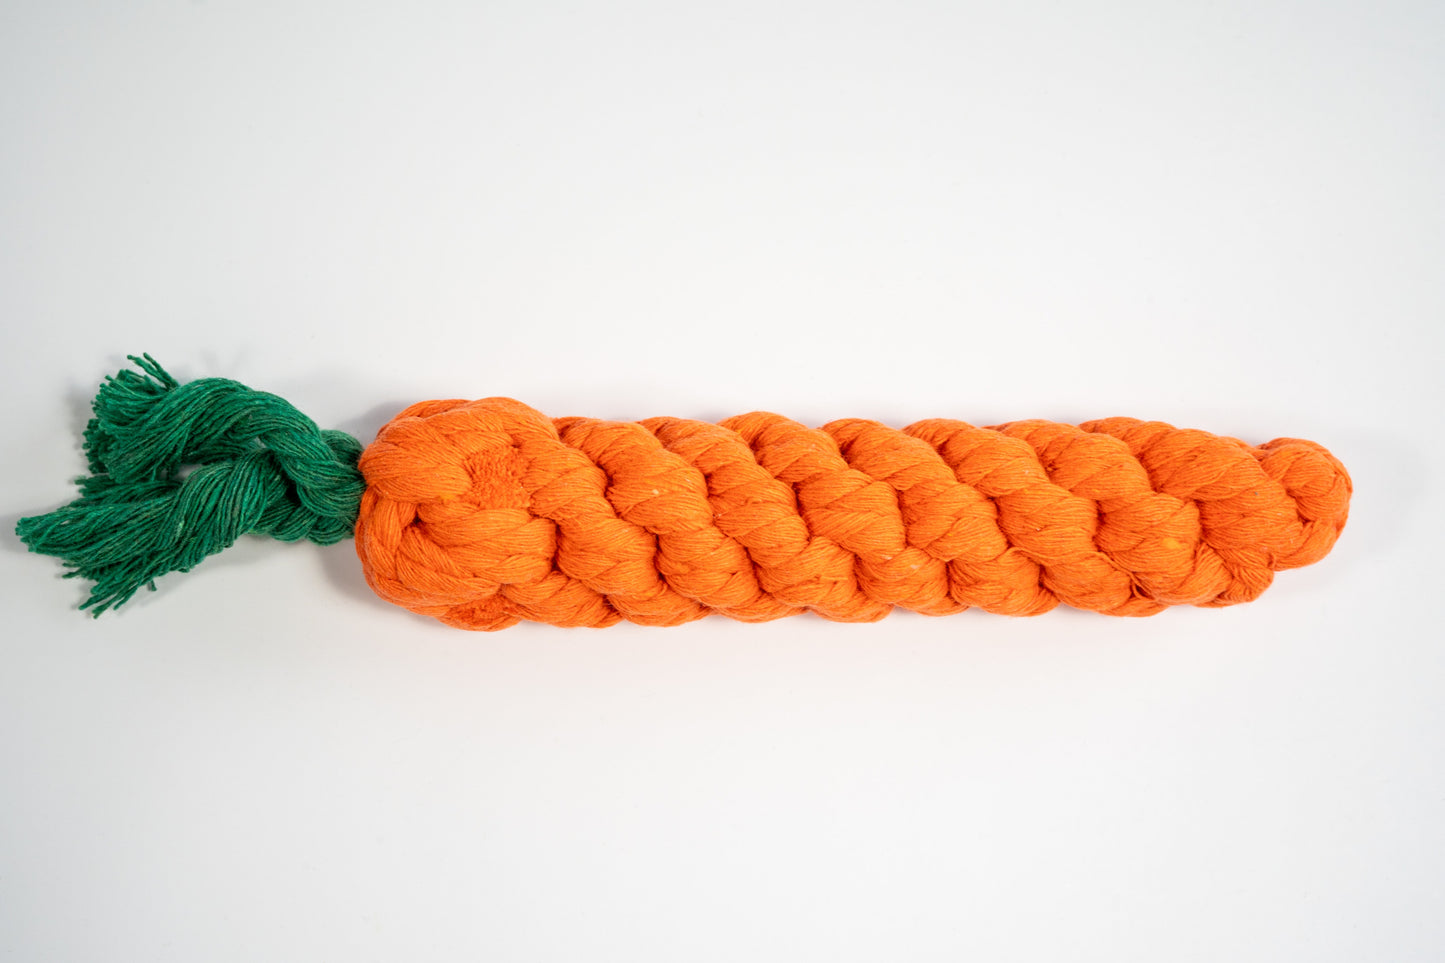 Carrot toy for small and medium-sized dogs.